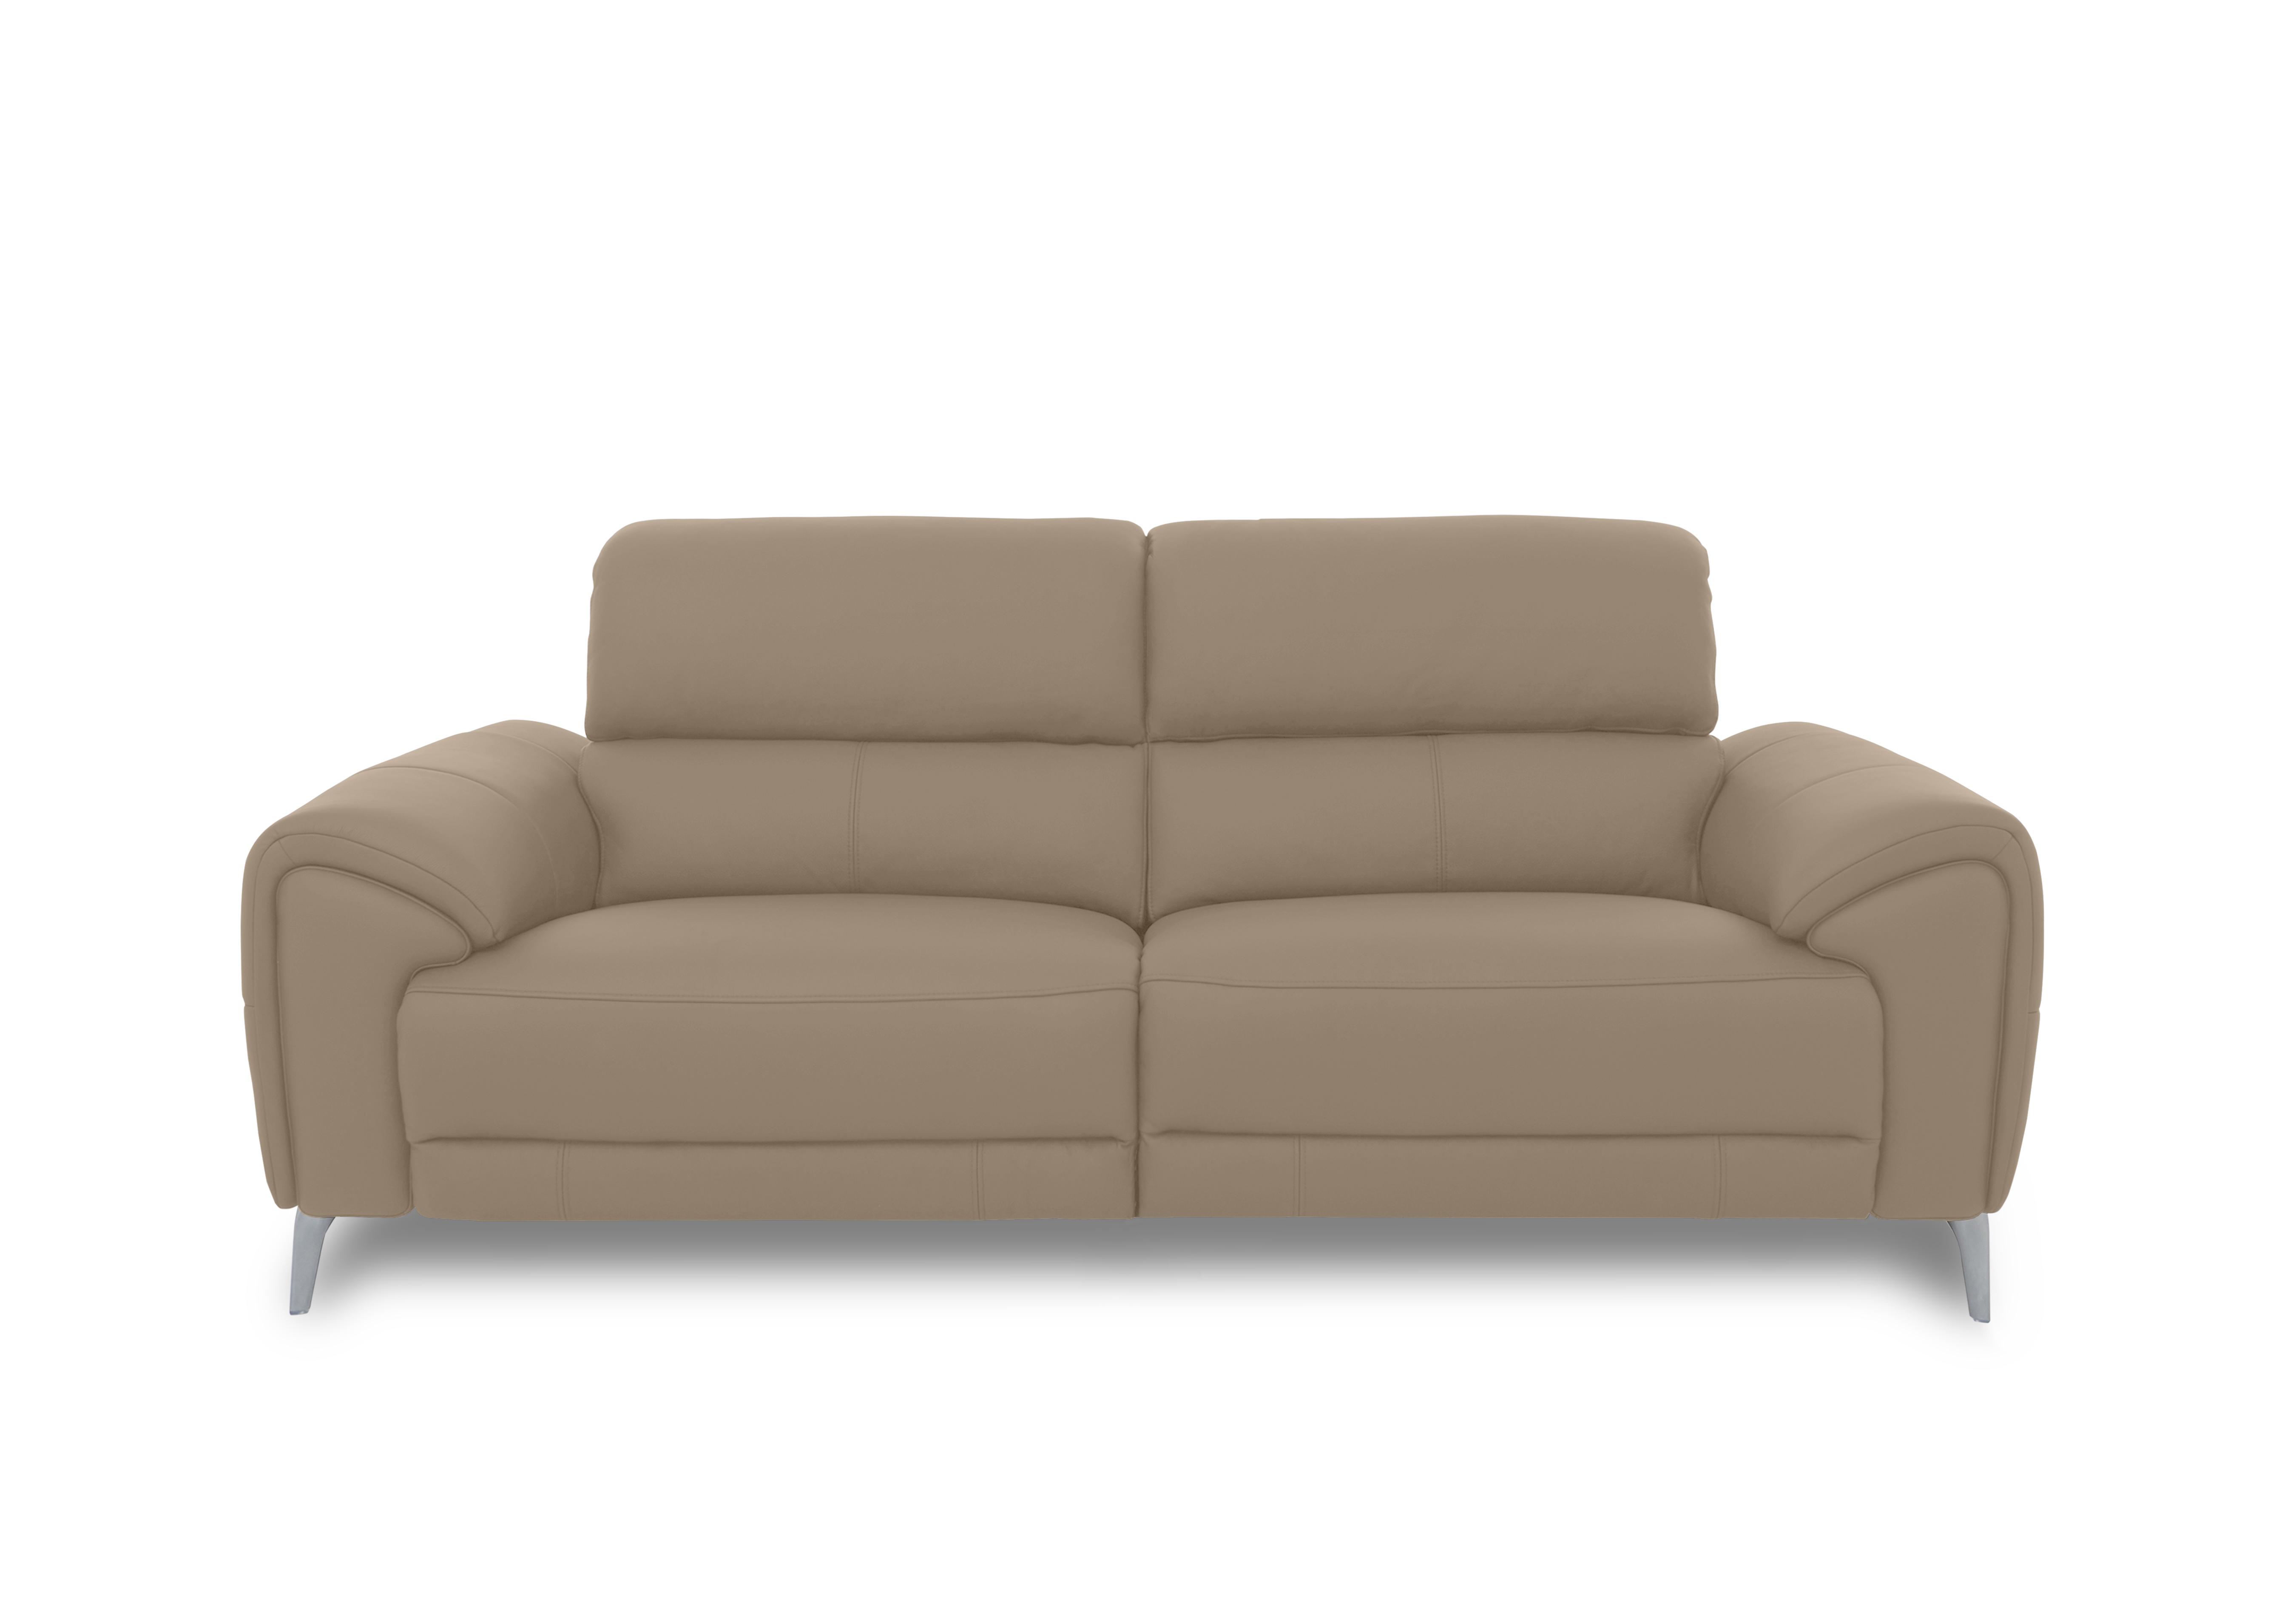 Vino Leather 3 Seater Sofa in Cat-60/06 Barley on Furniture Village